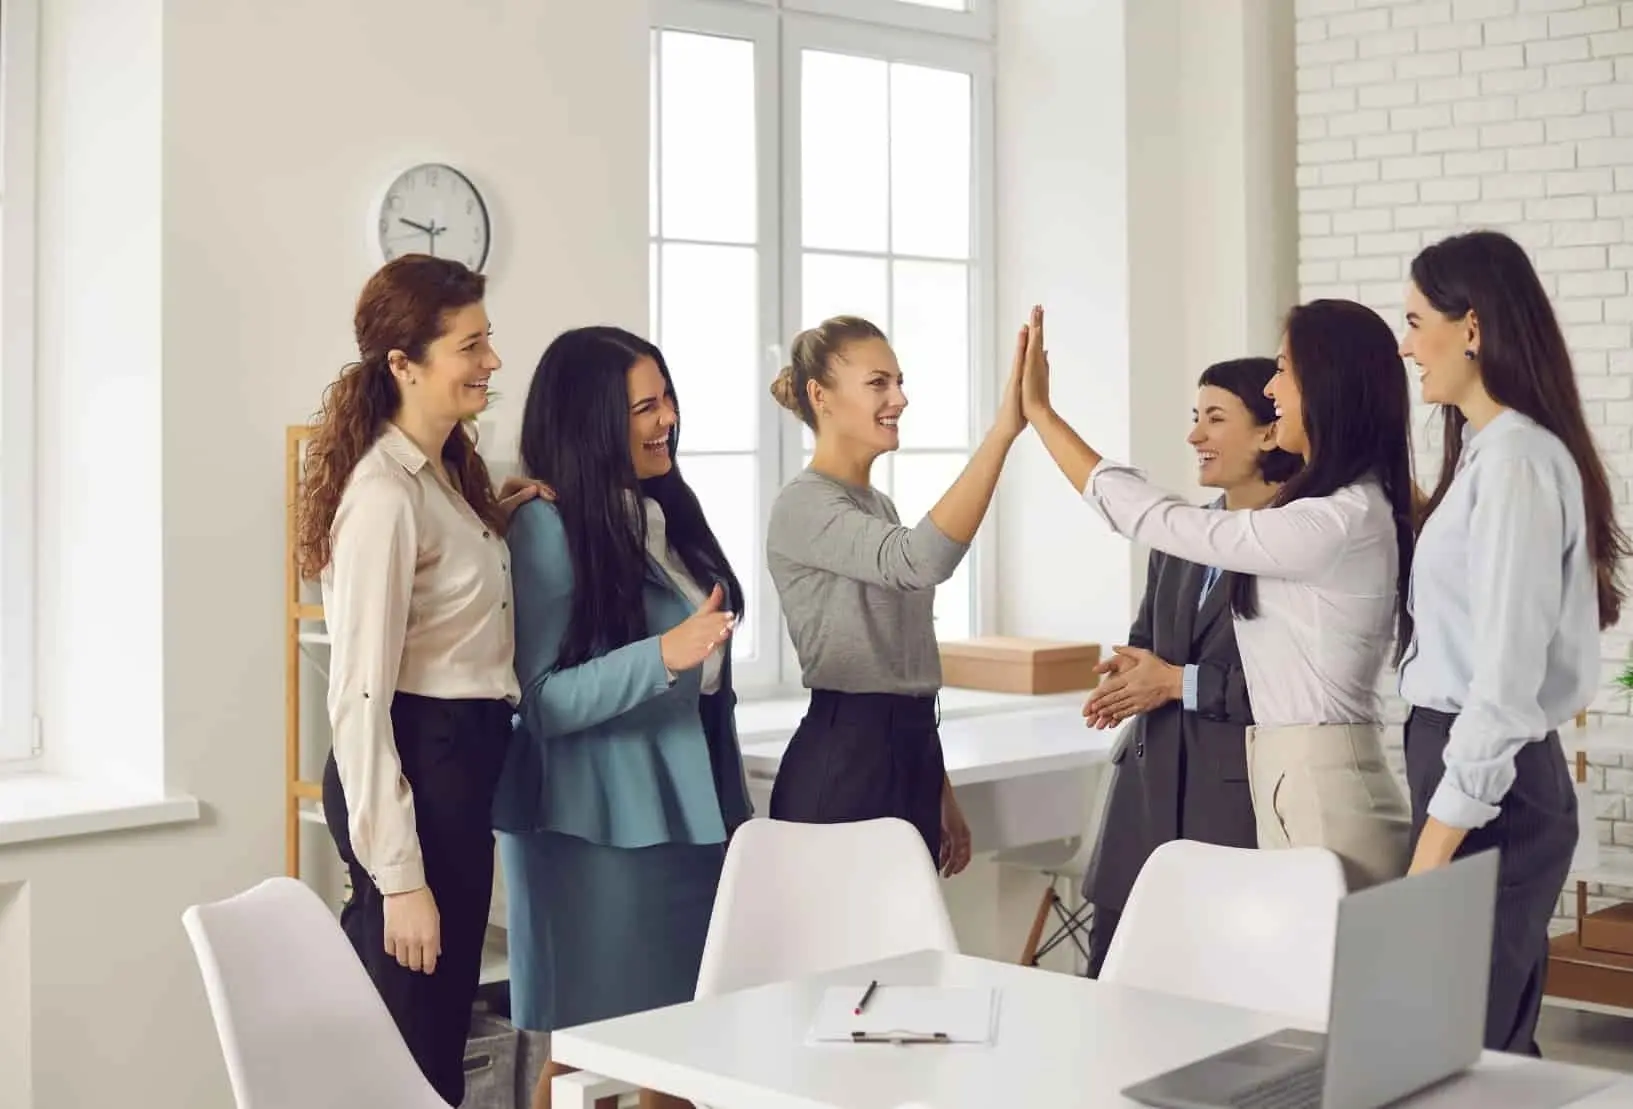 Image of a group of women celebrating the closing of some business or deal.